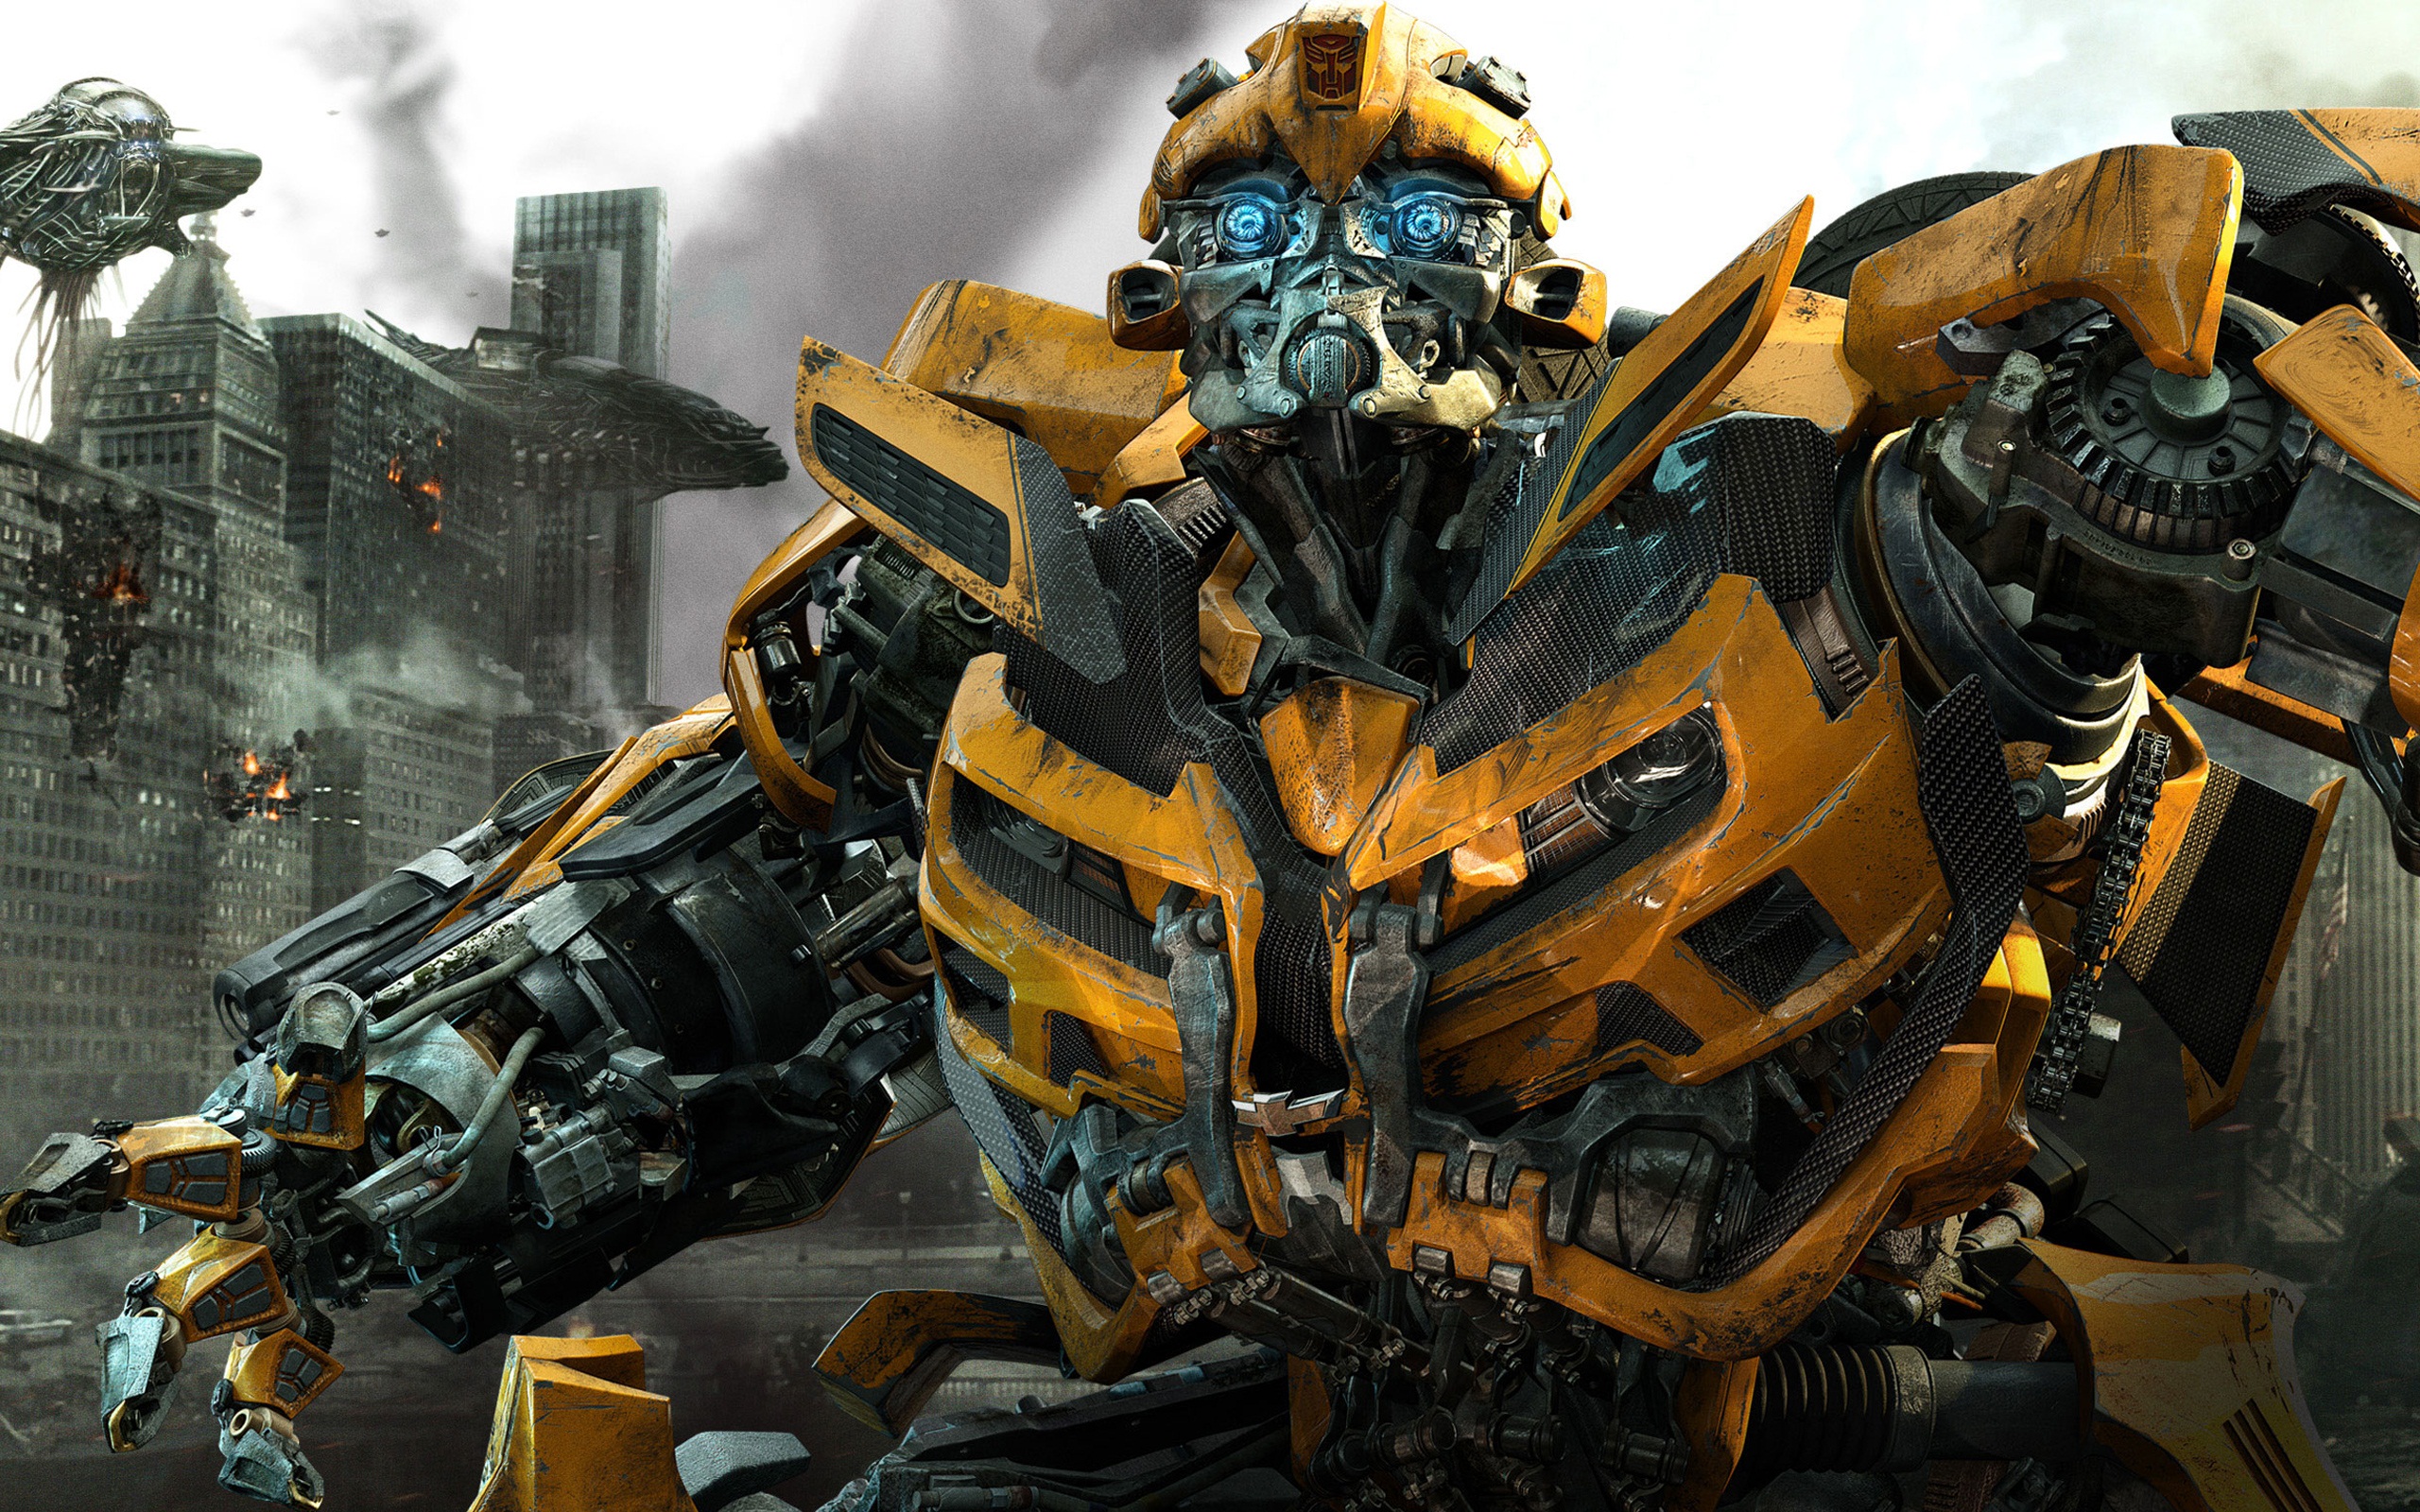 A brief history of Bumblebee and his role as the titular character in the movie